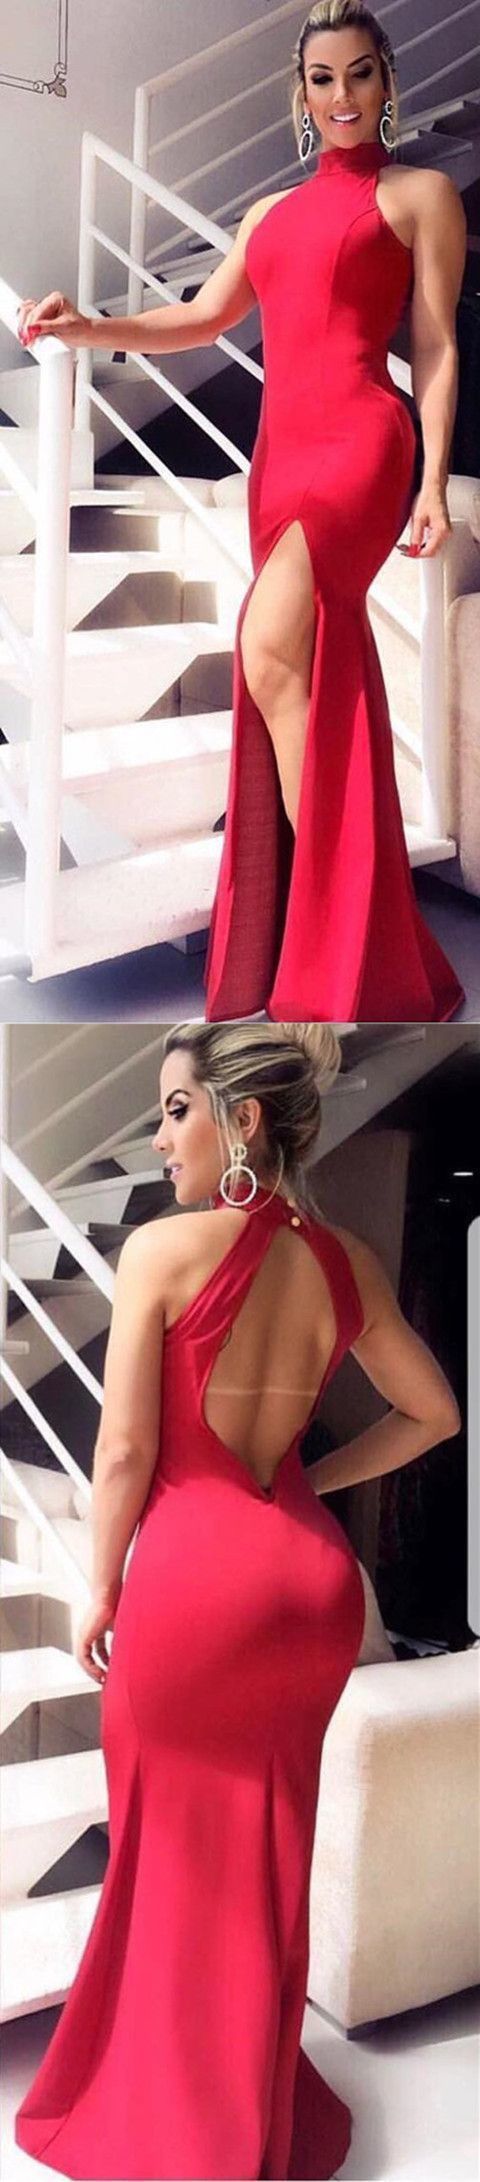 Boho Prom Dress, Red Satin Prom Dresses Long Mermaid Evening Dresses Halter Formal Gowns Sexy Backless Party Graduation Dresses  cg6889